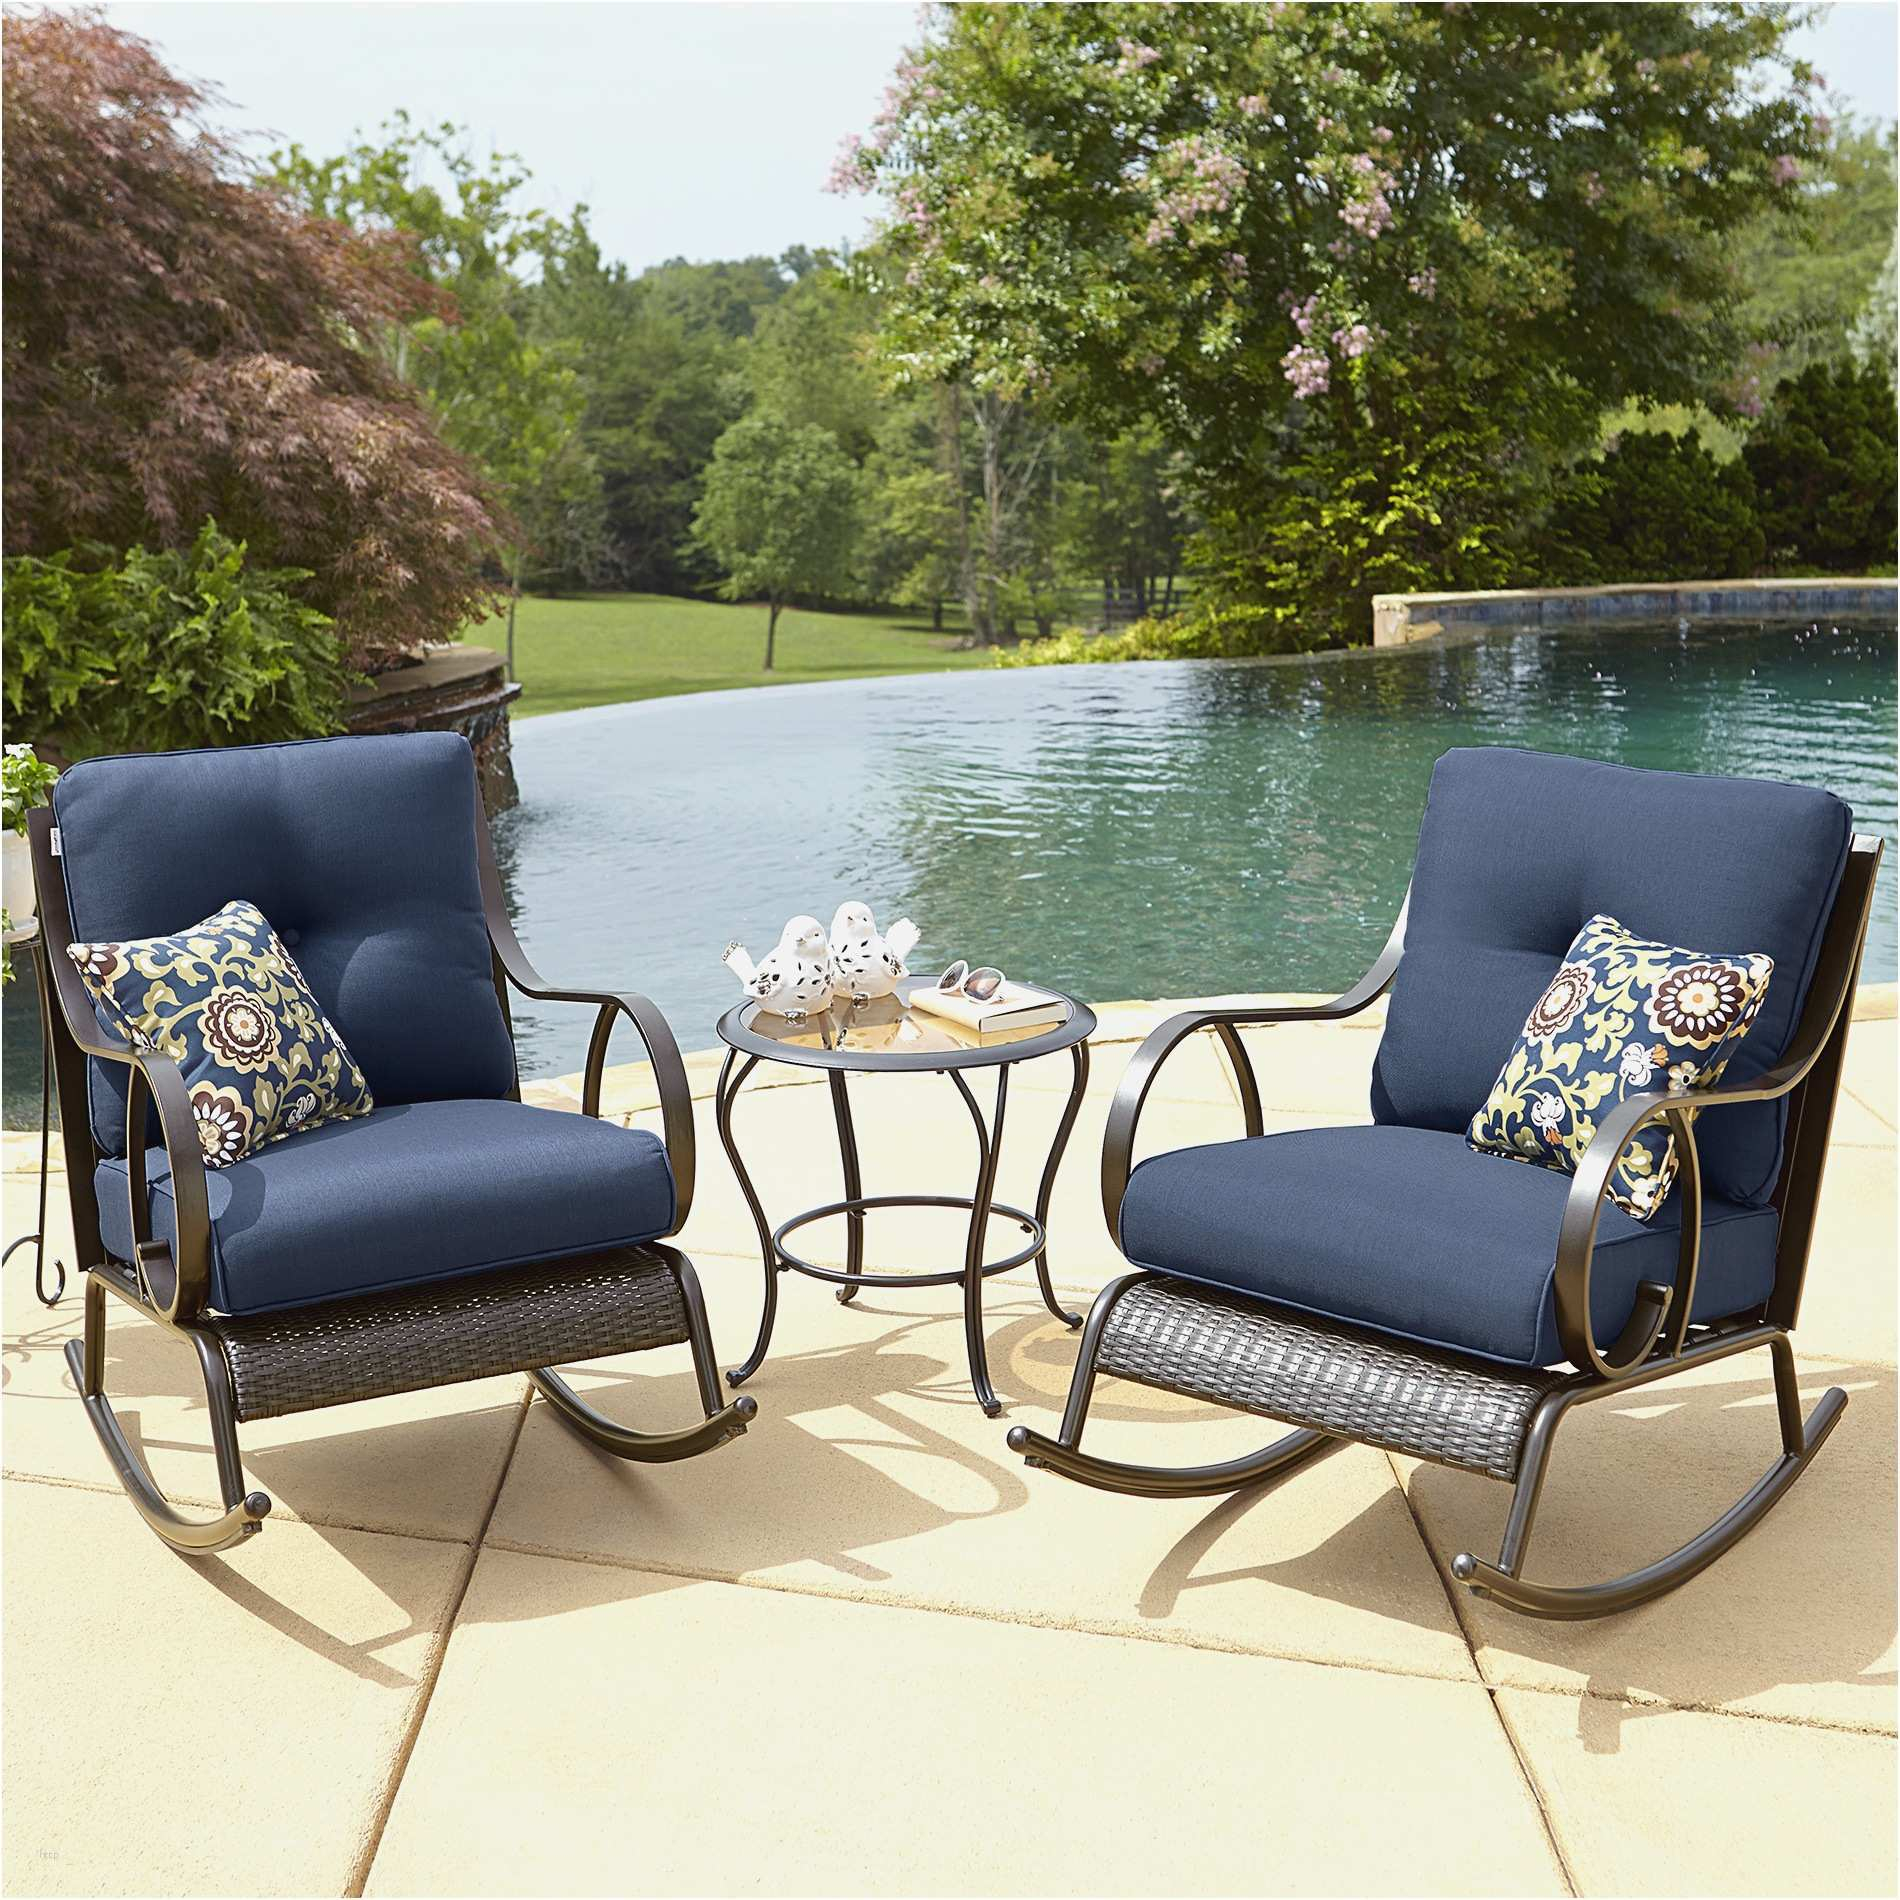 Beaumont Patio Furniture 28 Images Patio Furniture Beaumont throughout dimensions 1900 X 1900